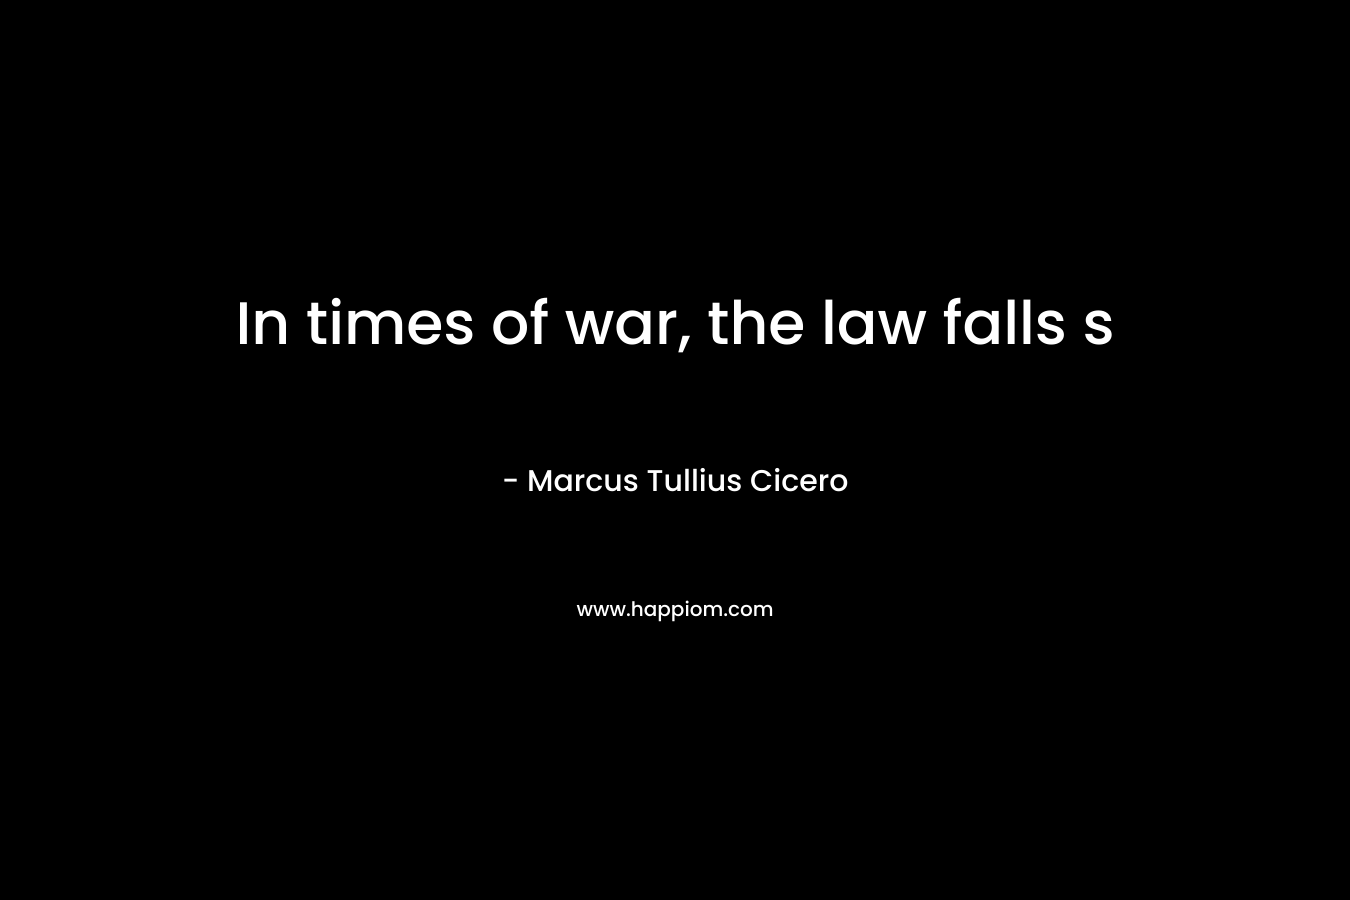 In times of war, the law falls s – Marcus Tullius Cicero